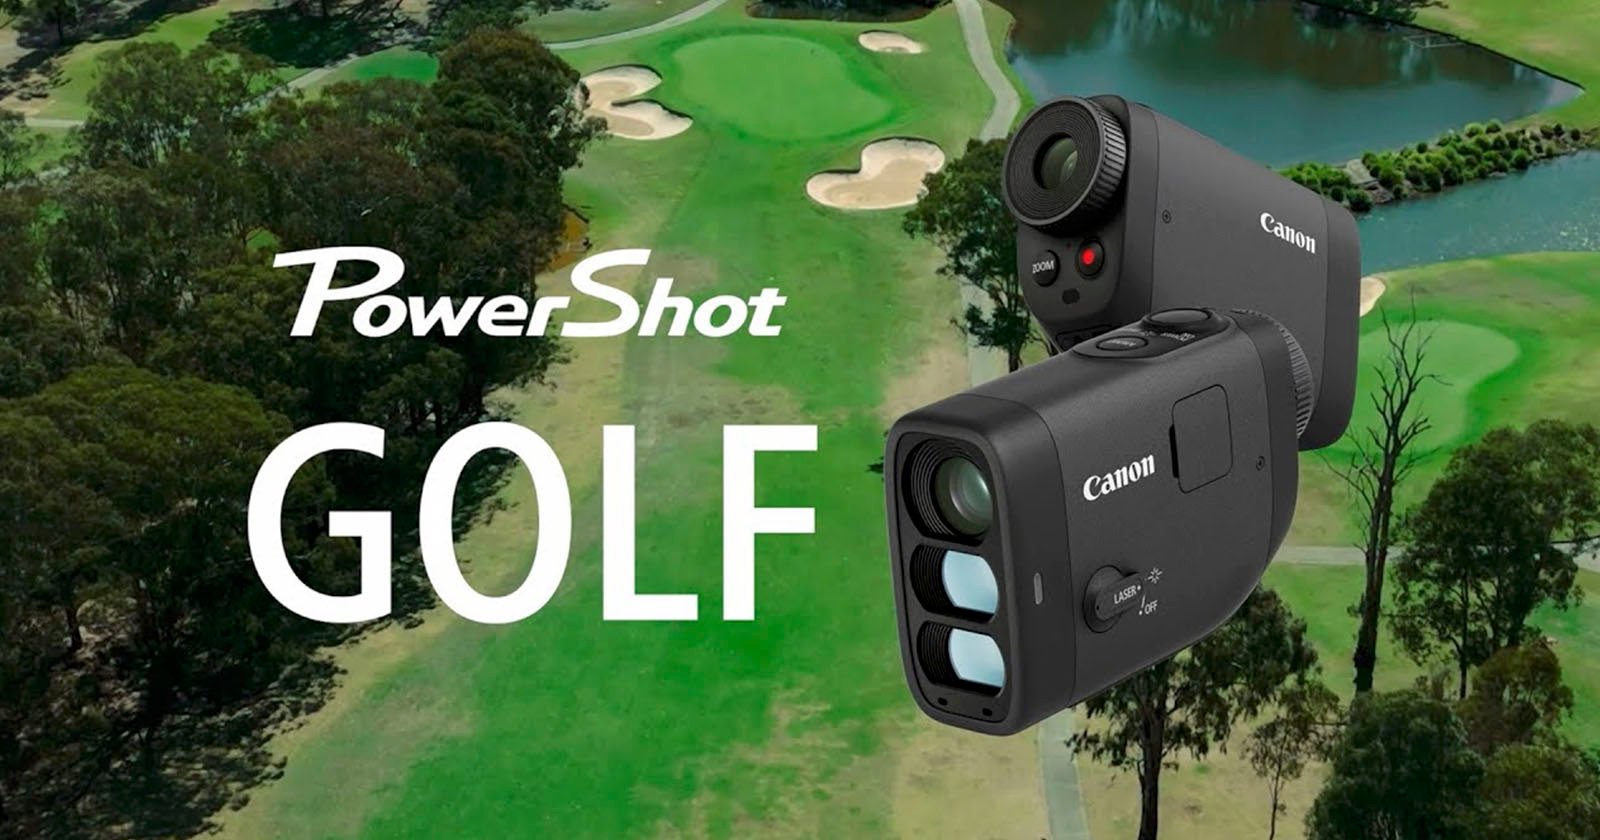 Canon’s PowerShot Golf is a Laser Rangefinder and Compact Camera